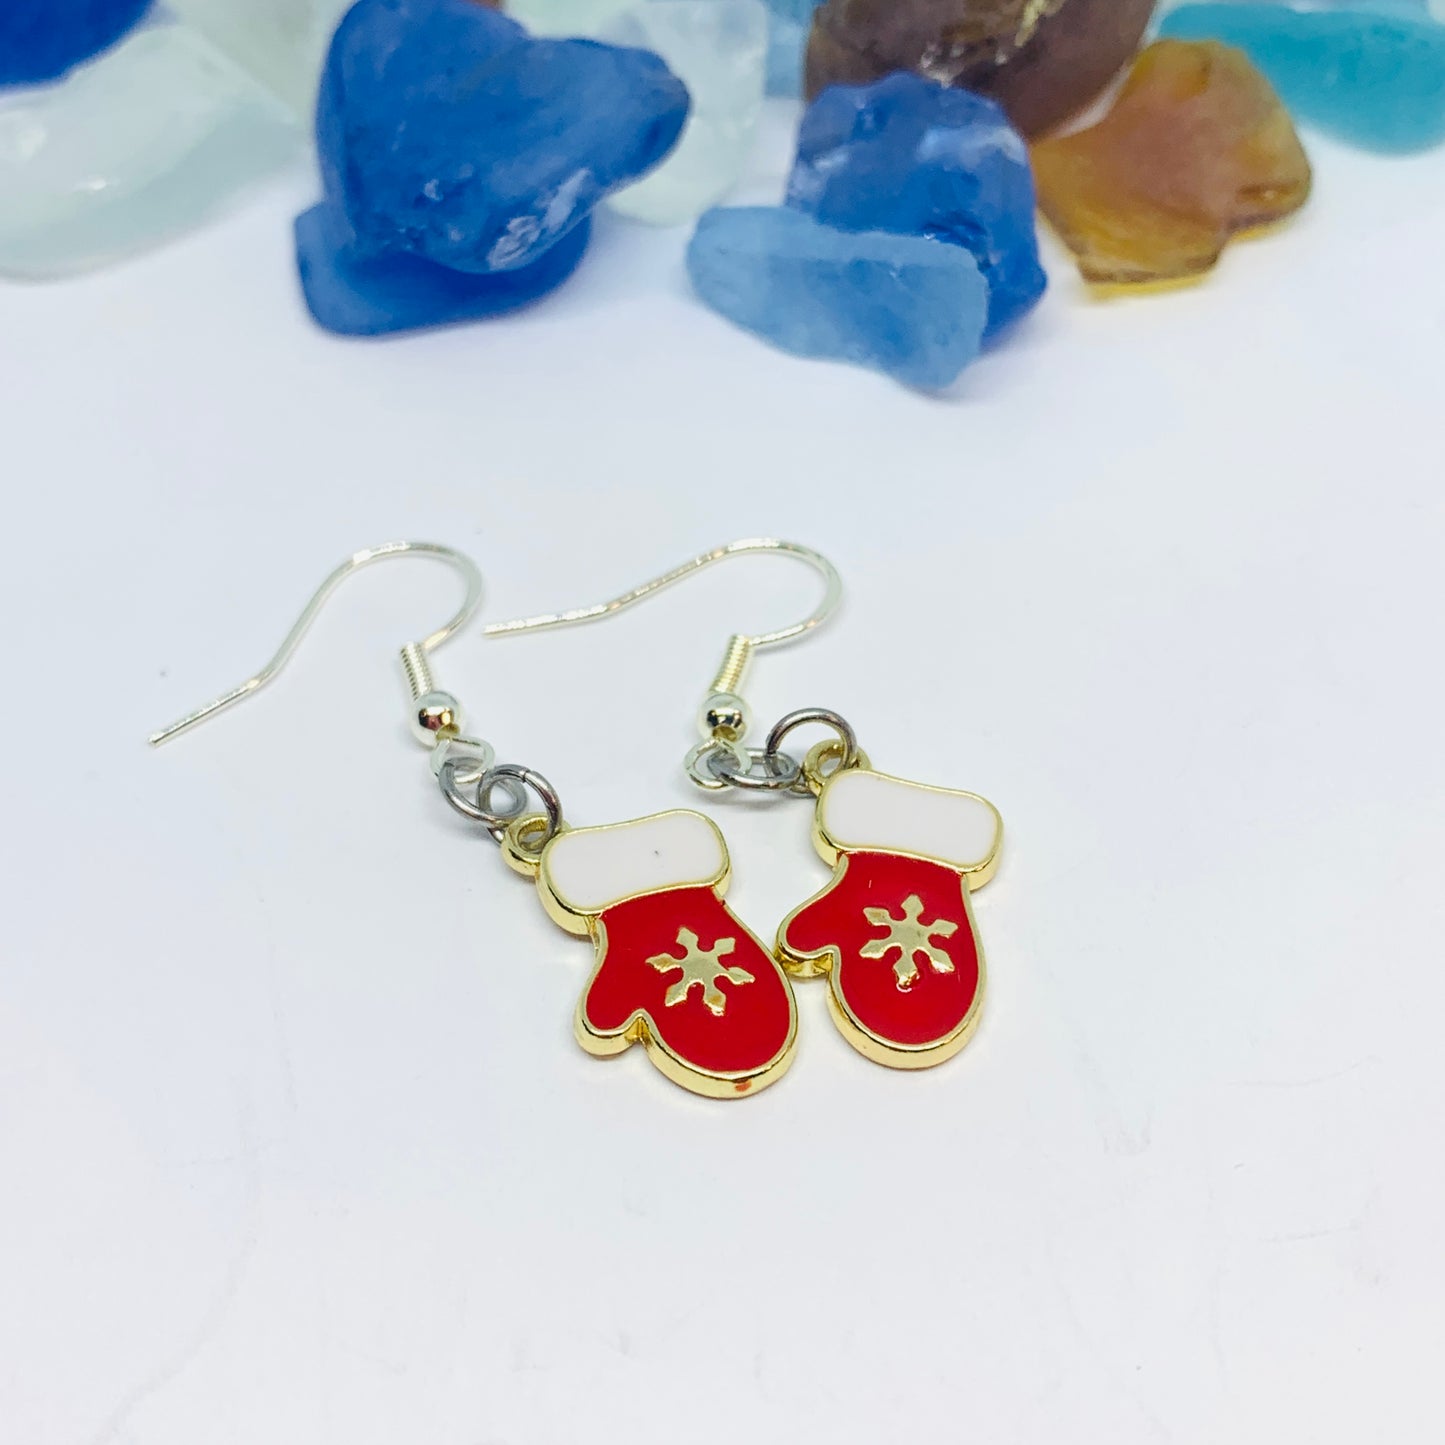 Red Mittens Enamel Earrings with Silver Wires and Backs | Winter Earrings | Christmas Jewelry | Holiday Earrings